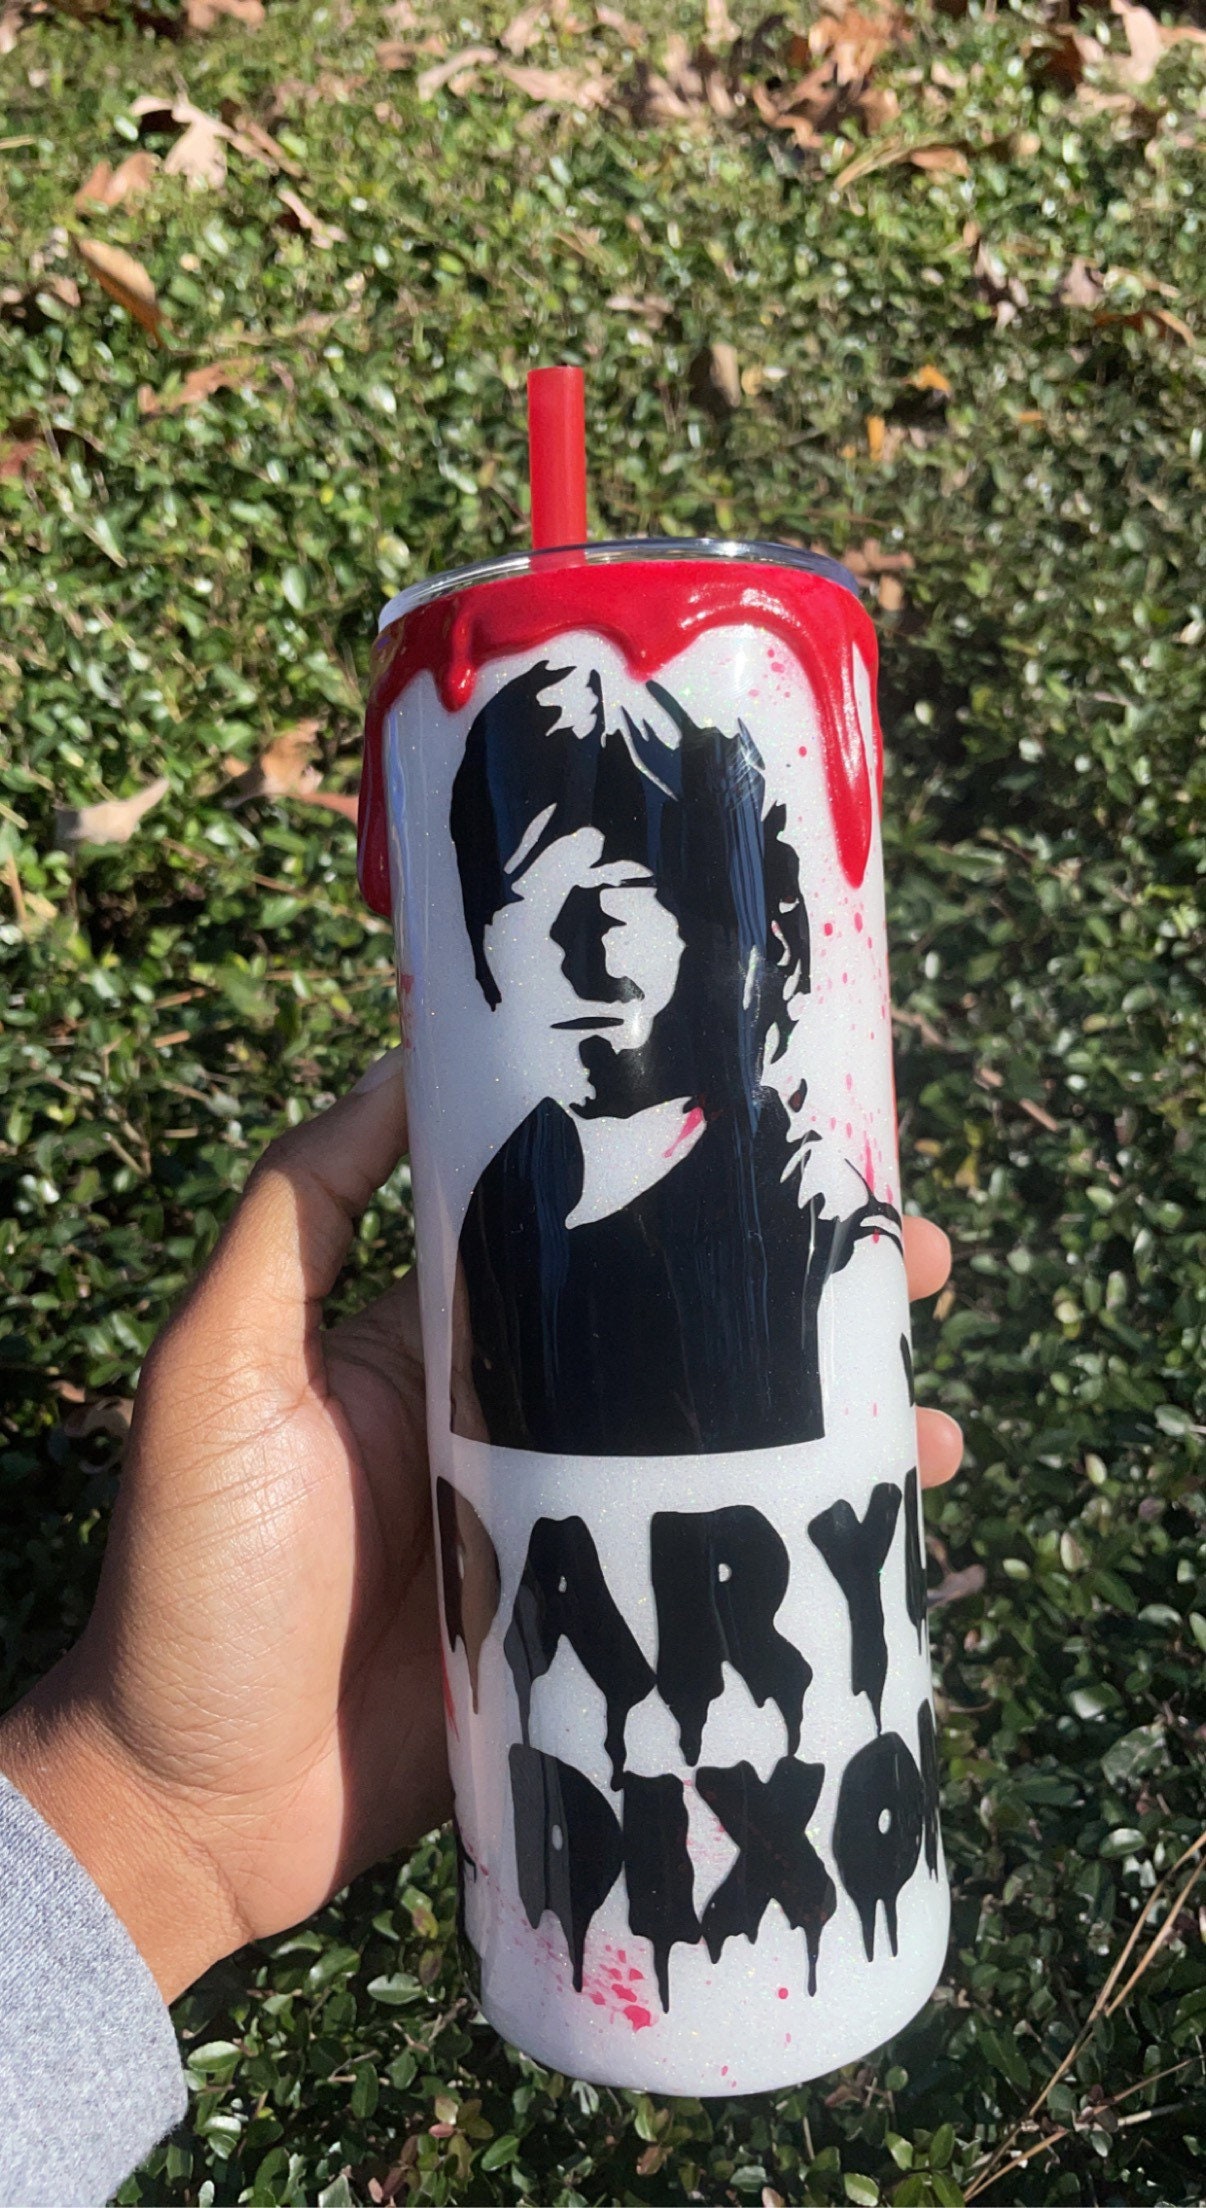 Daryl Dixon The Walking Dead Cold Cup, Cold Cups